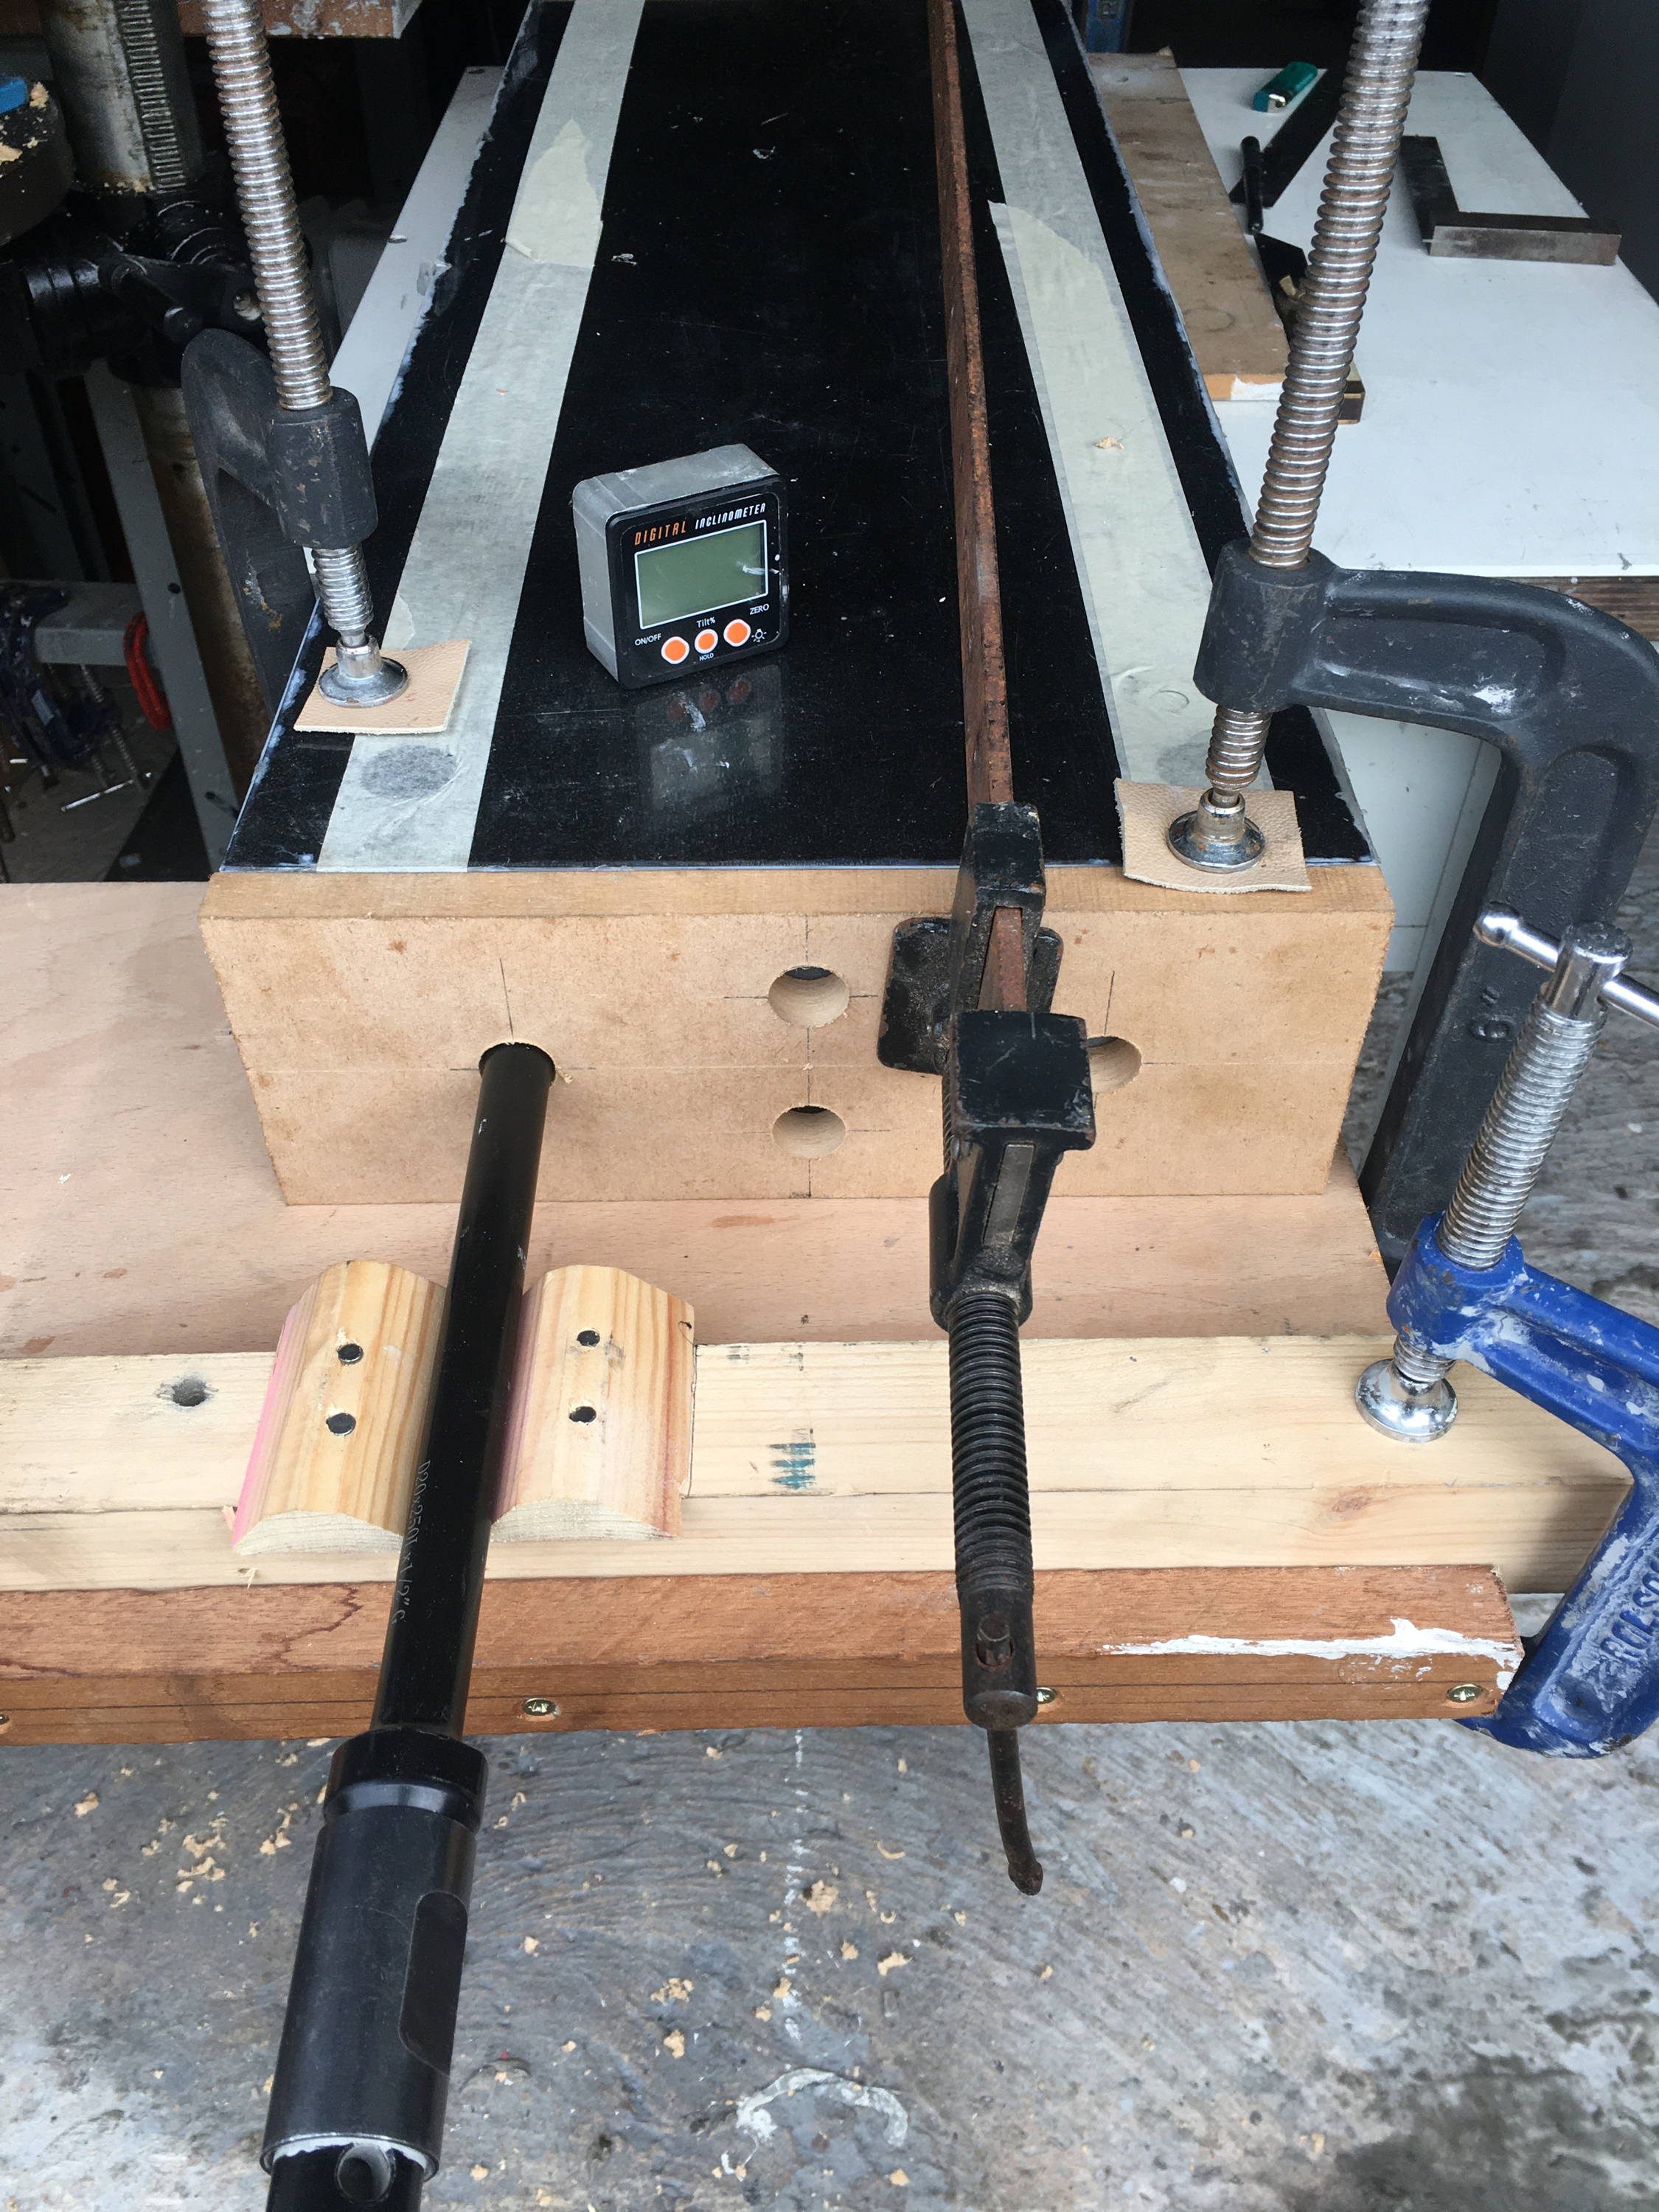 Drilling Granite Jig for holding the core drill square.